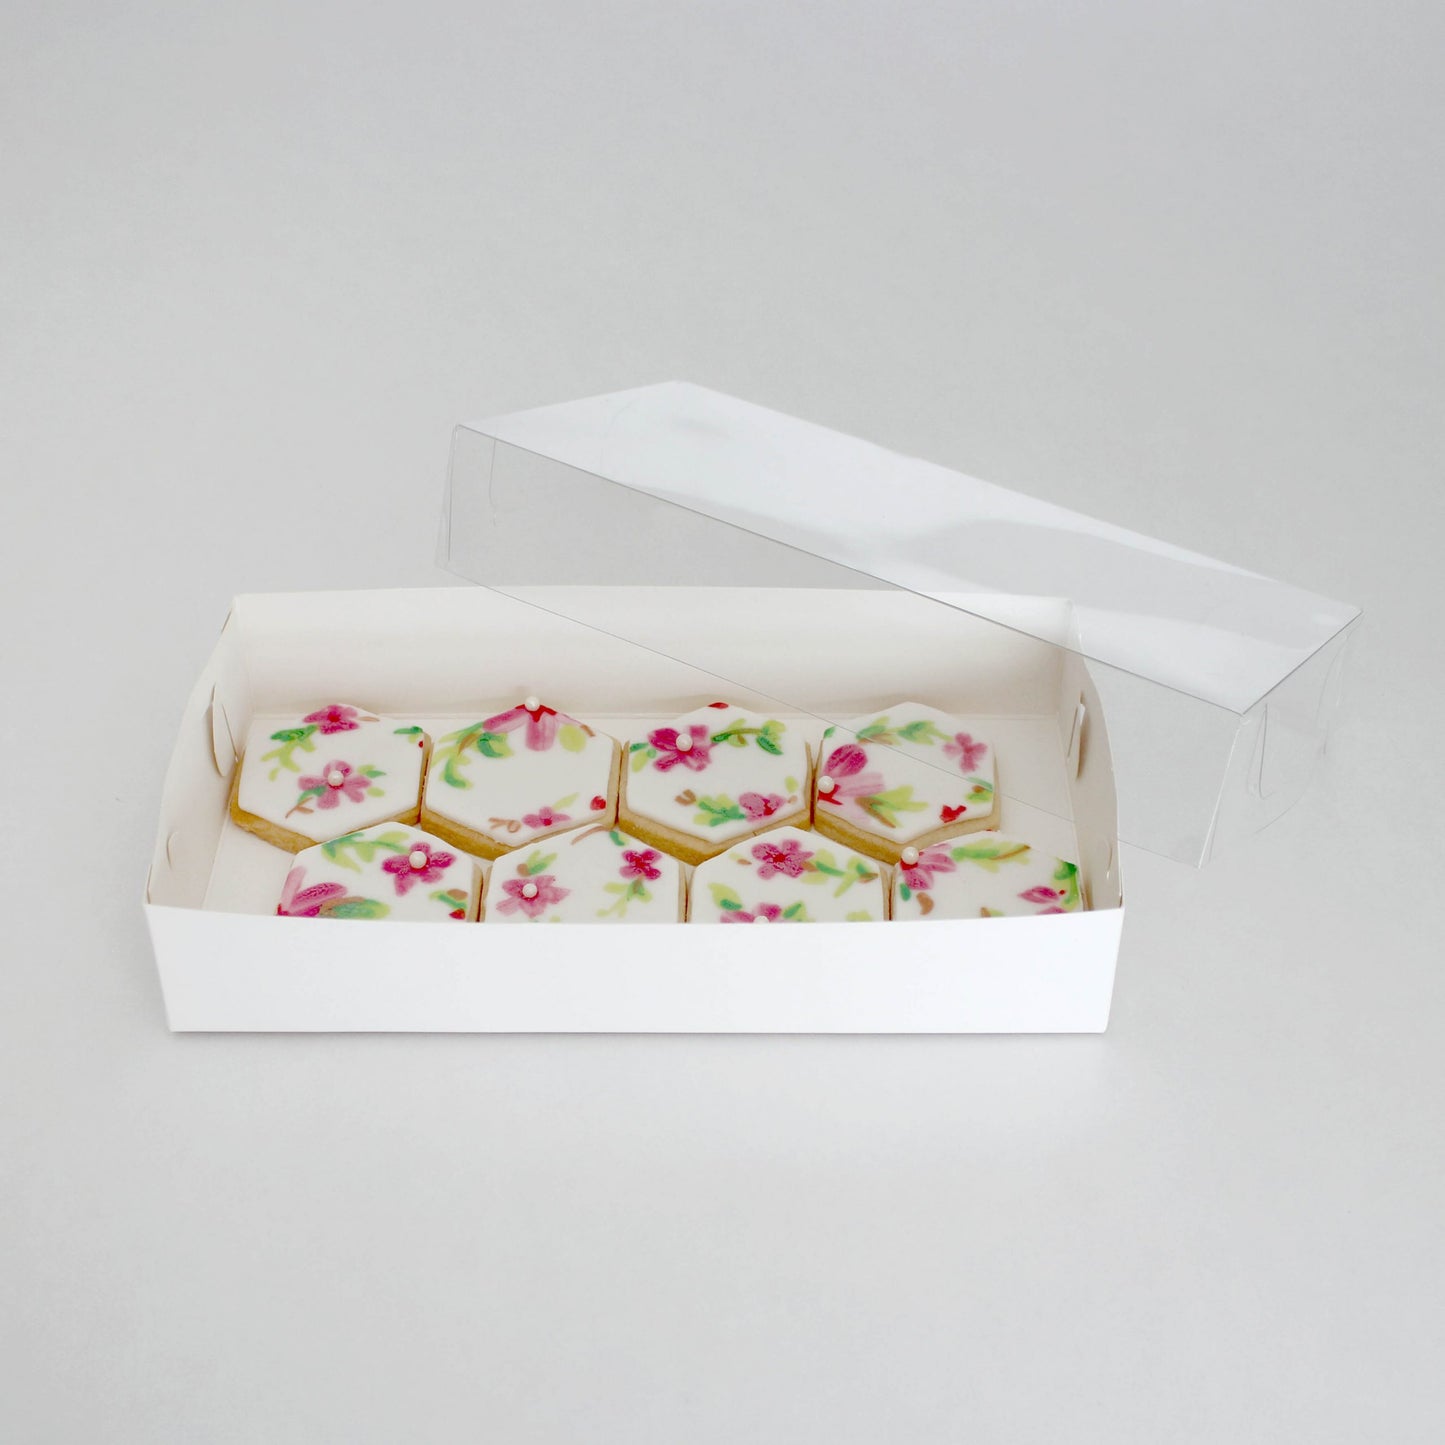 CLEAR LID BISCUIT BOX RECTANGLE 9x4.5x1.5(H)in